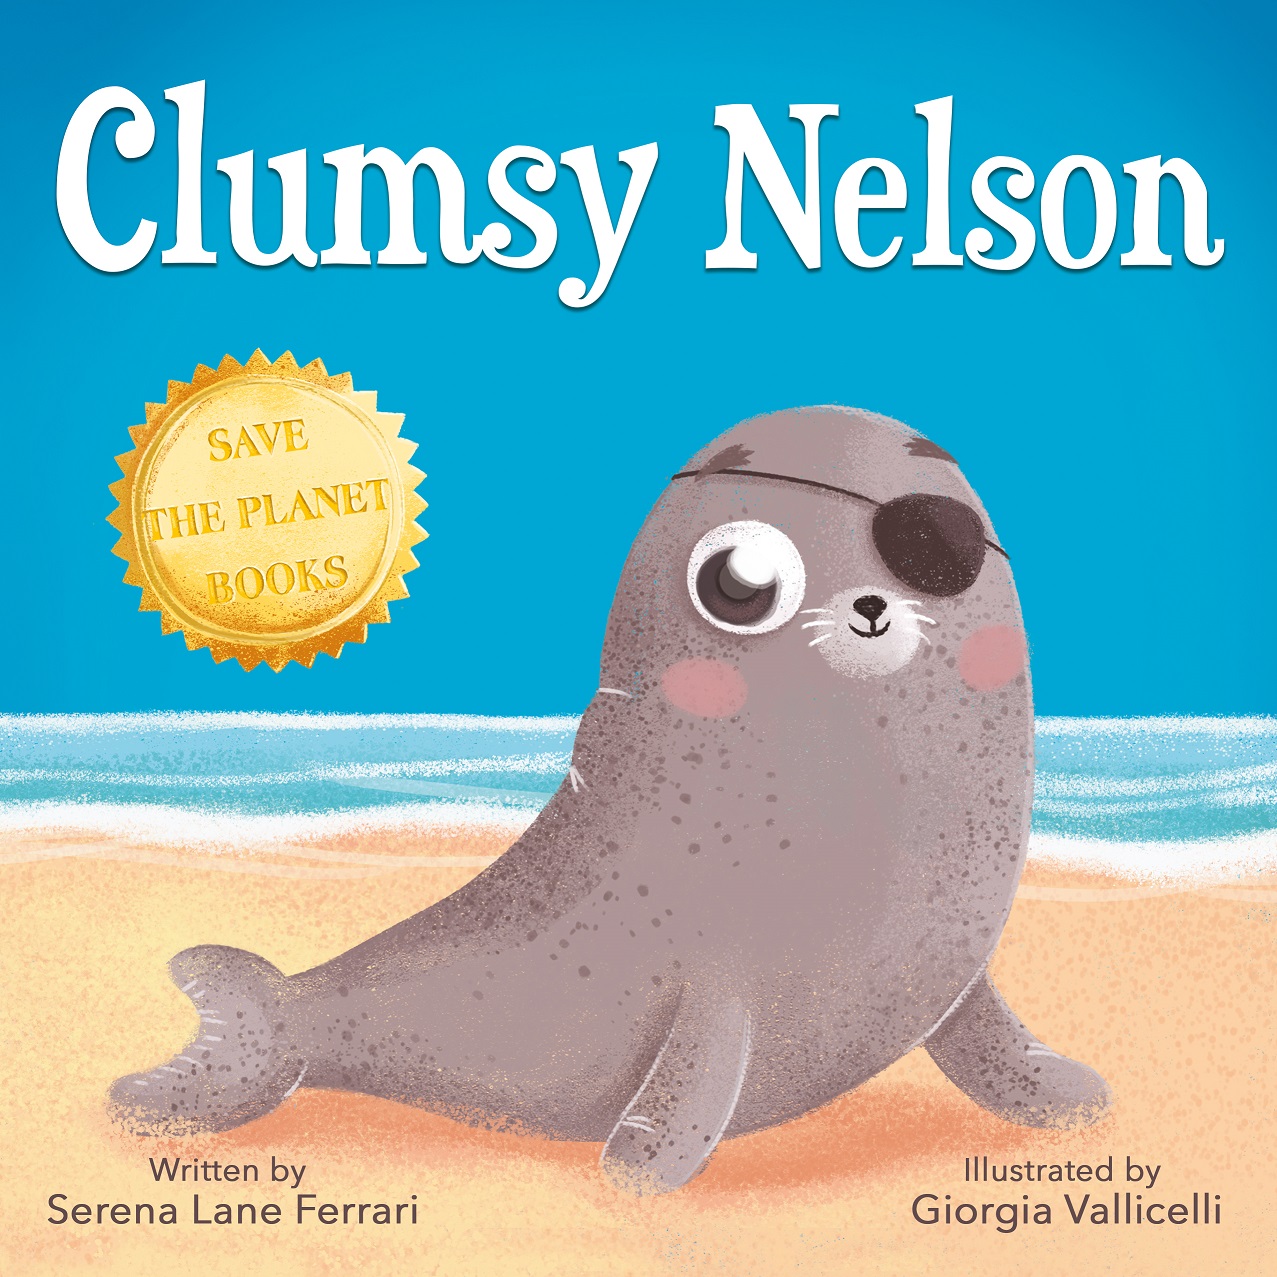 FREE: Clumsy Nelson: A story of Self-esteem, Bravery, Grit, Friendship with an Environmental message by Serena Lane Ferrari